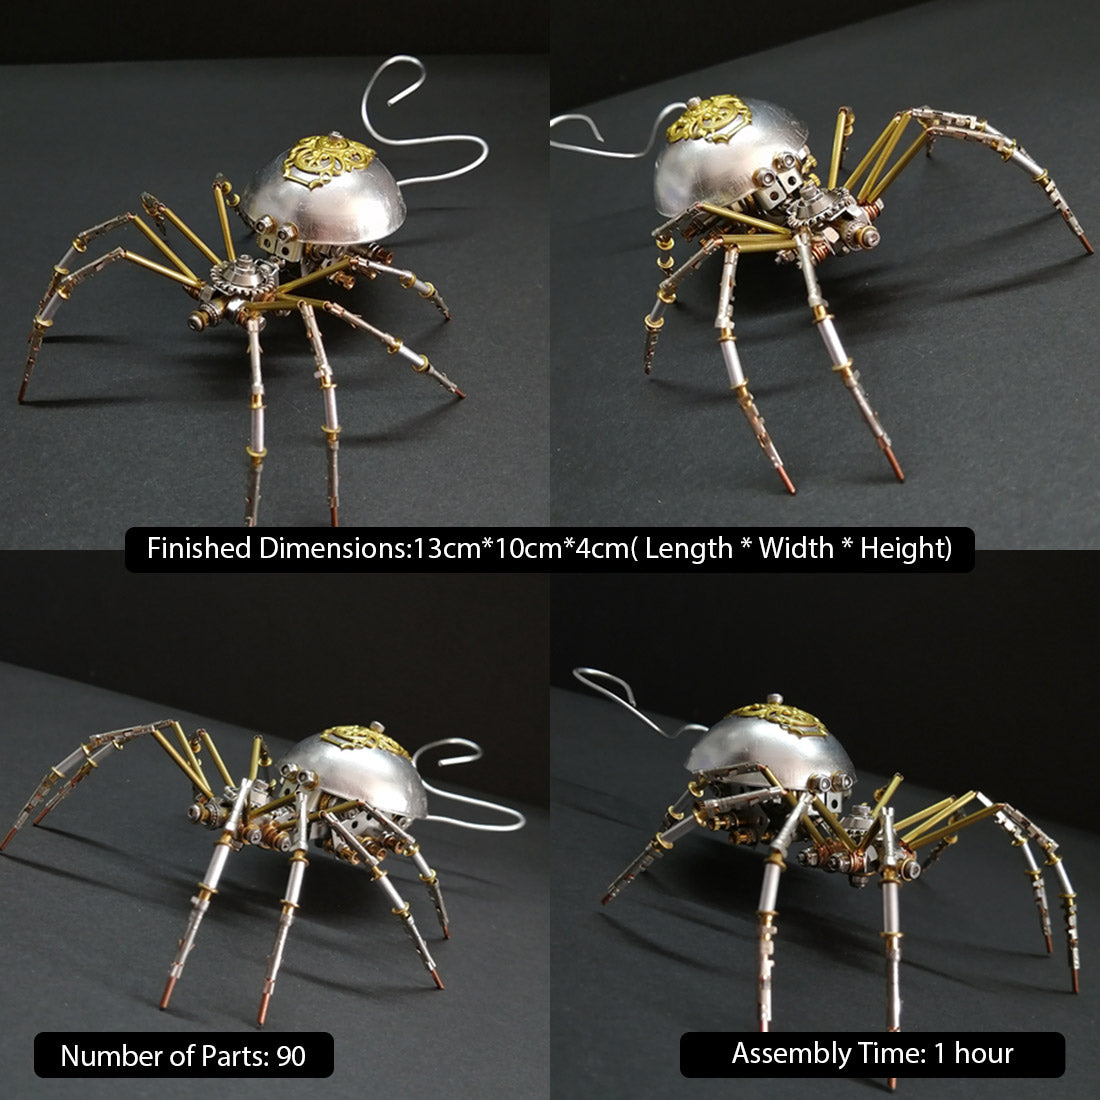 Mother Spider 3D Metal Model Building Kits Steampunk Insect